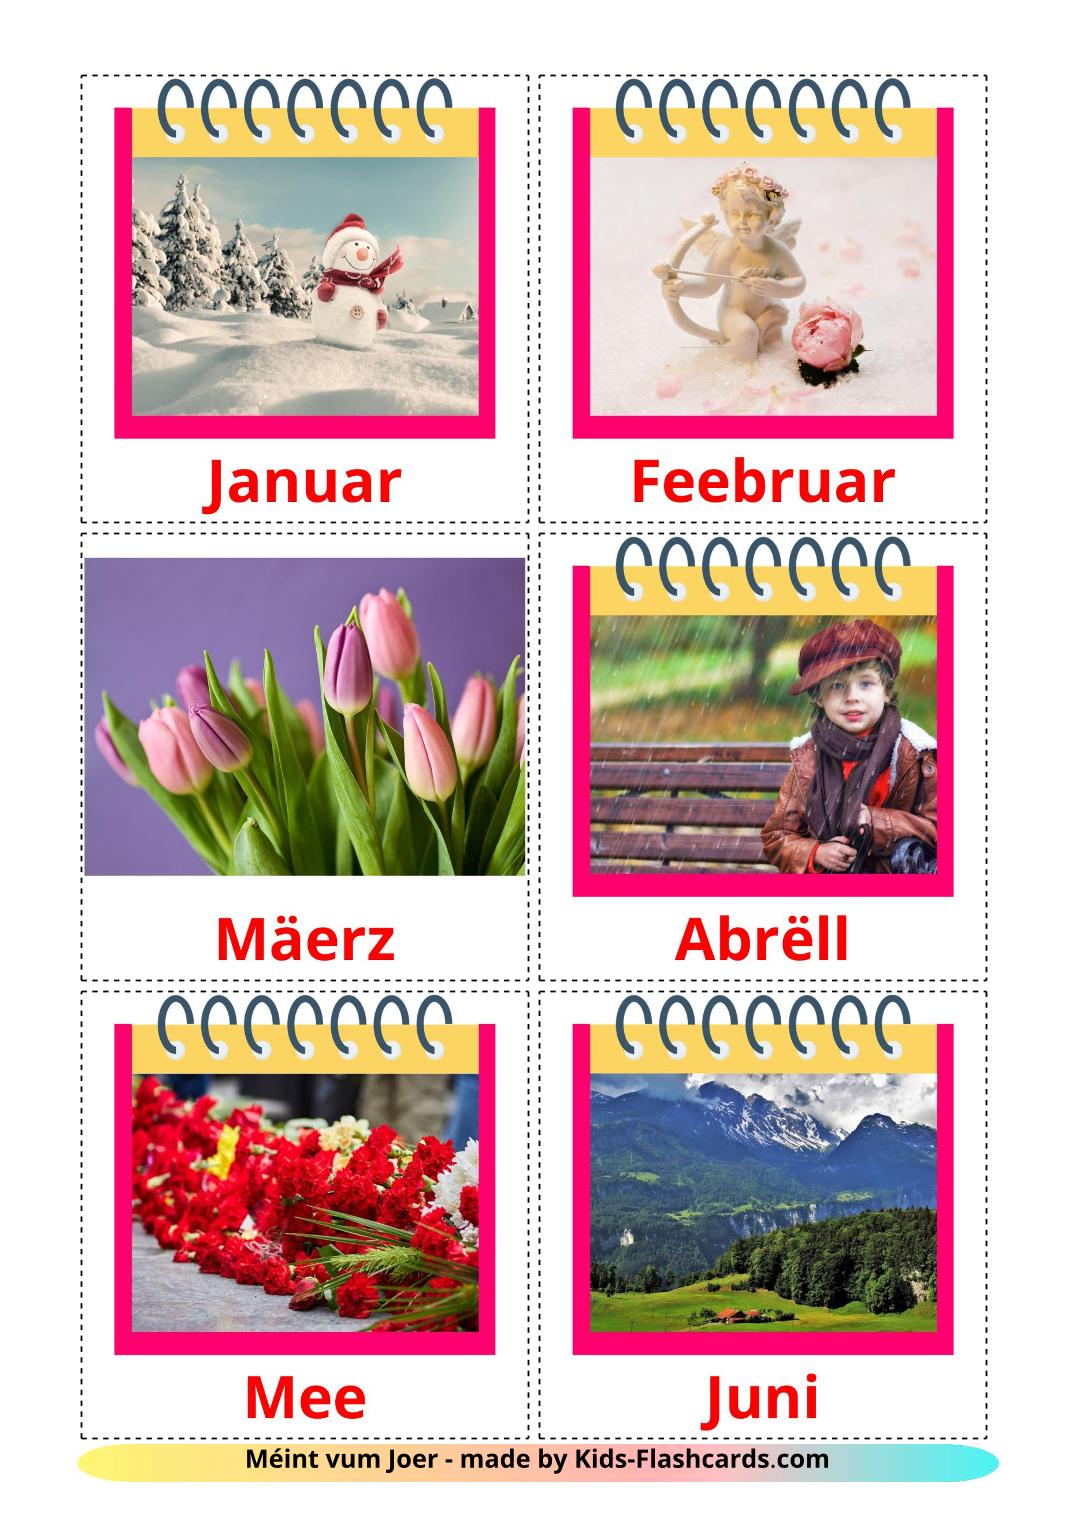 Months of the Year - 12 Free Printable luxembourgish Flashcards 